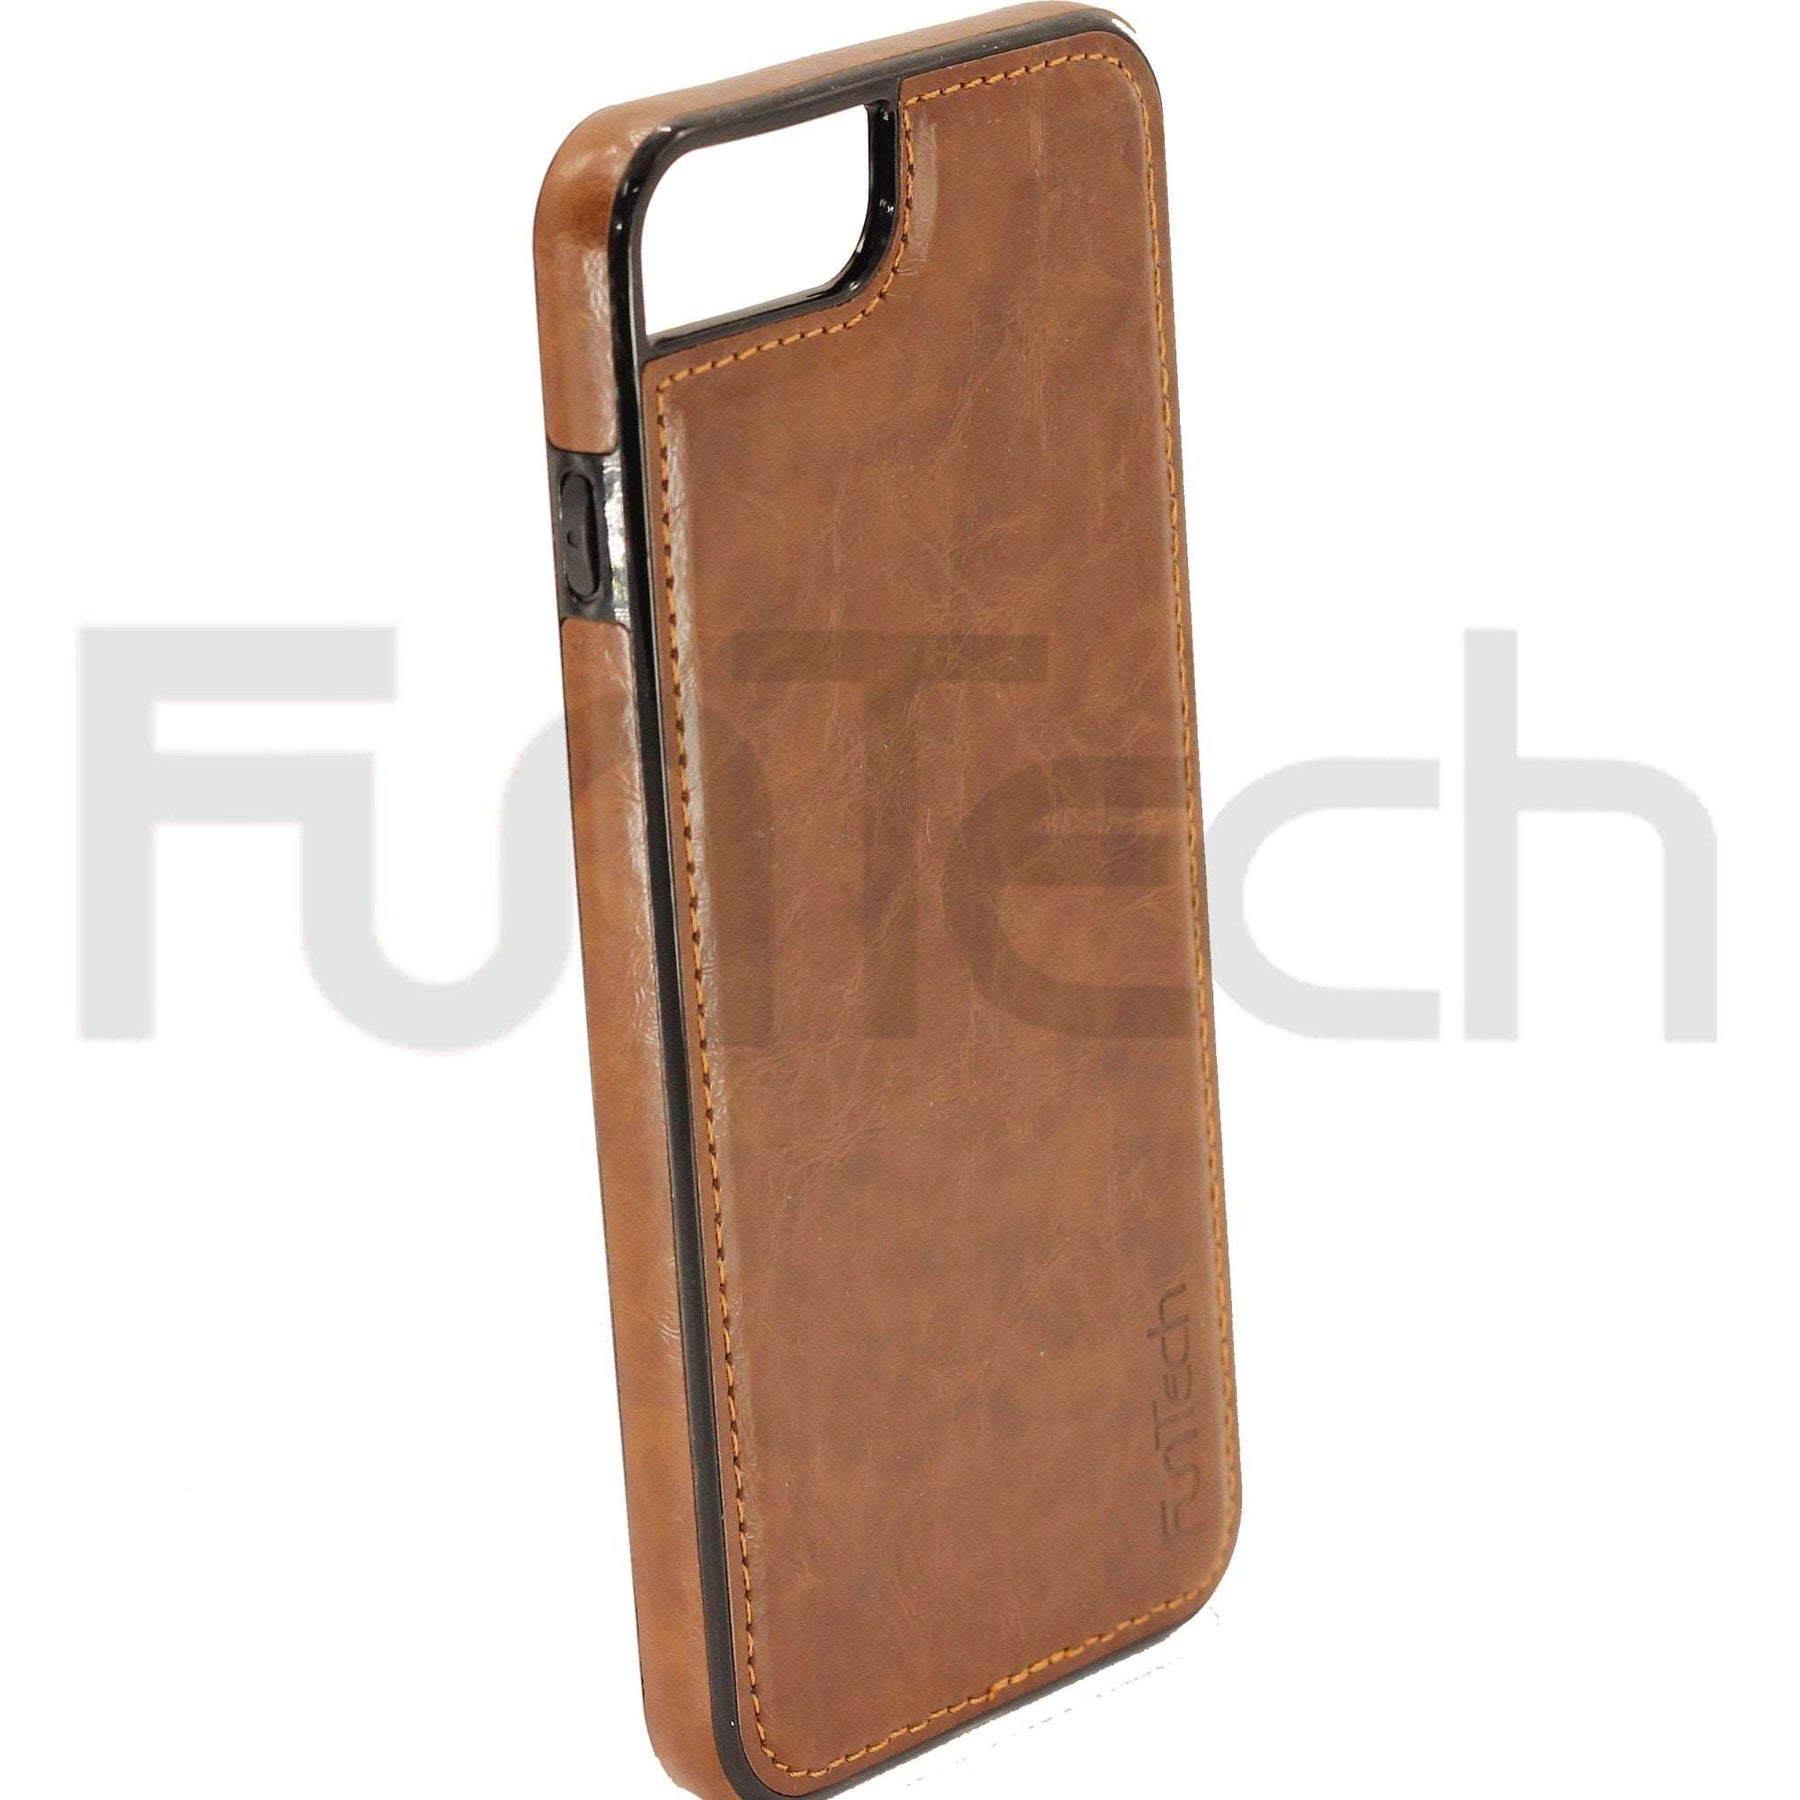 Apple iPhone 7/8 Plus Leather Back Case Brown